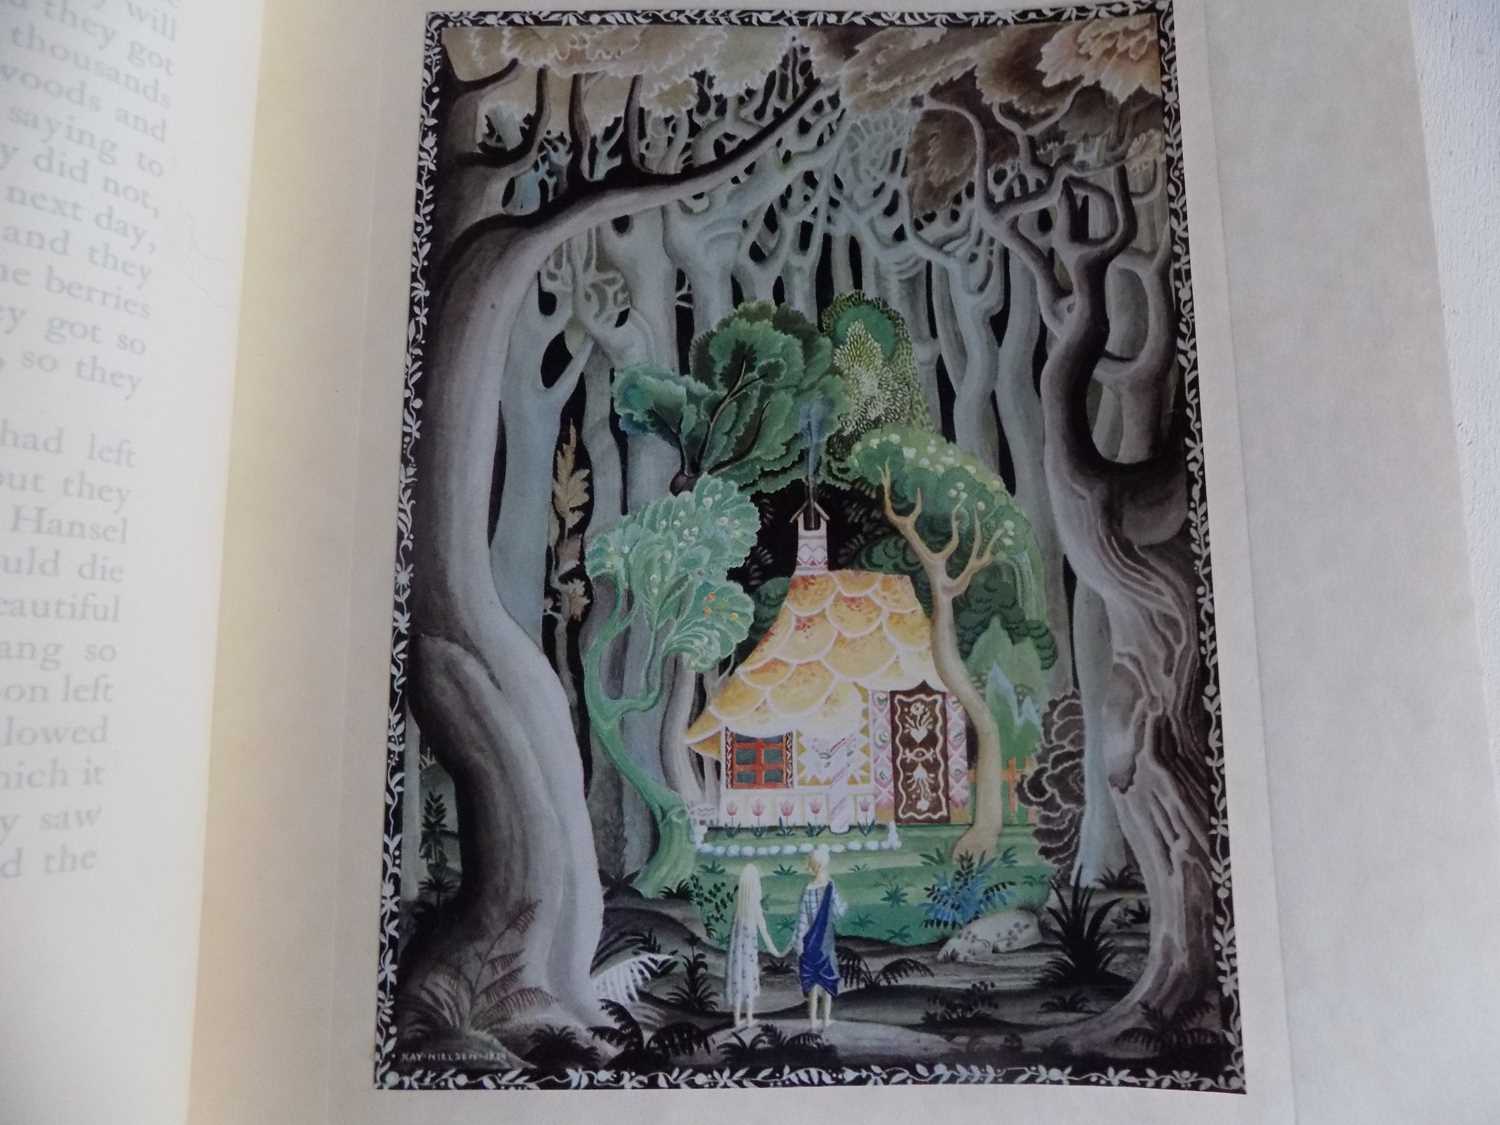 KAY NIELSEN ILLUSTRATIONS. "Hansel and Gretel, and other stories by the brothers Grimm." signed by - Image 5 of 14